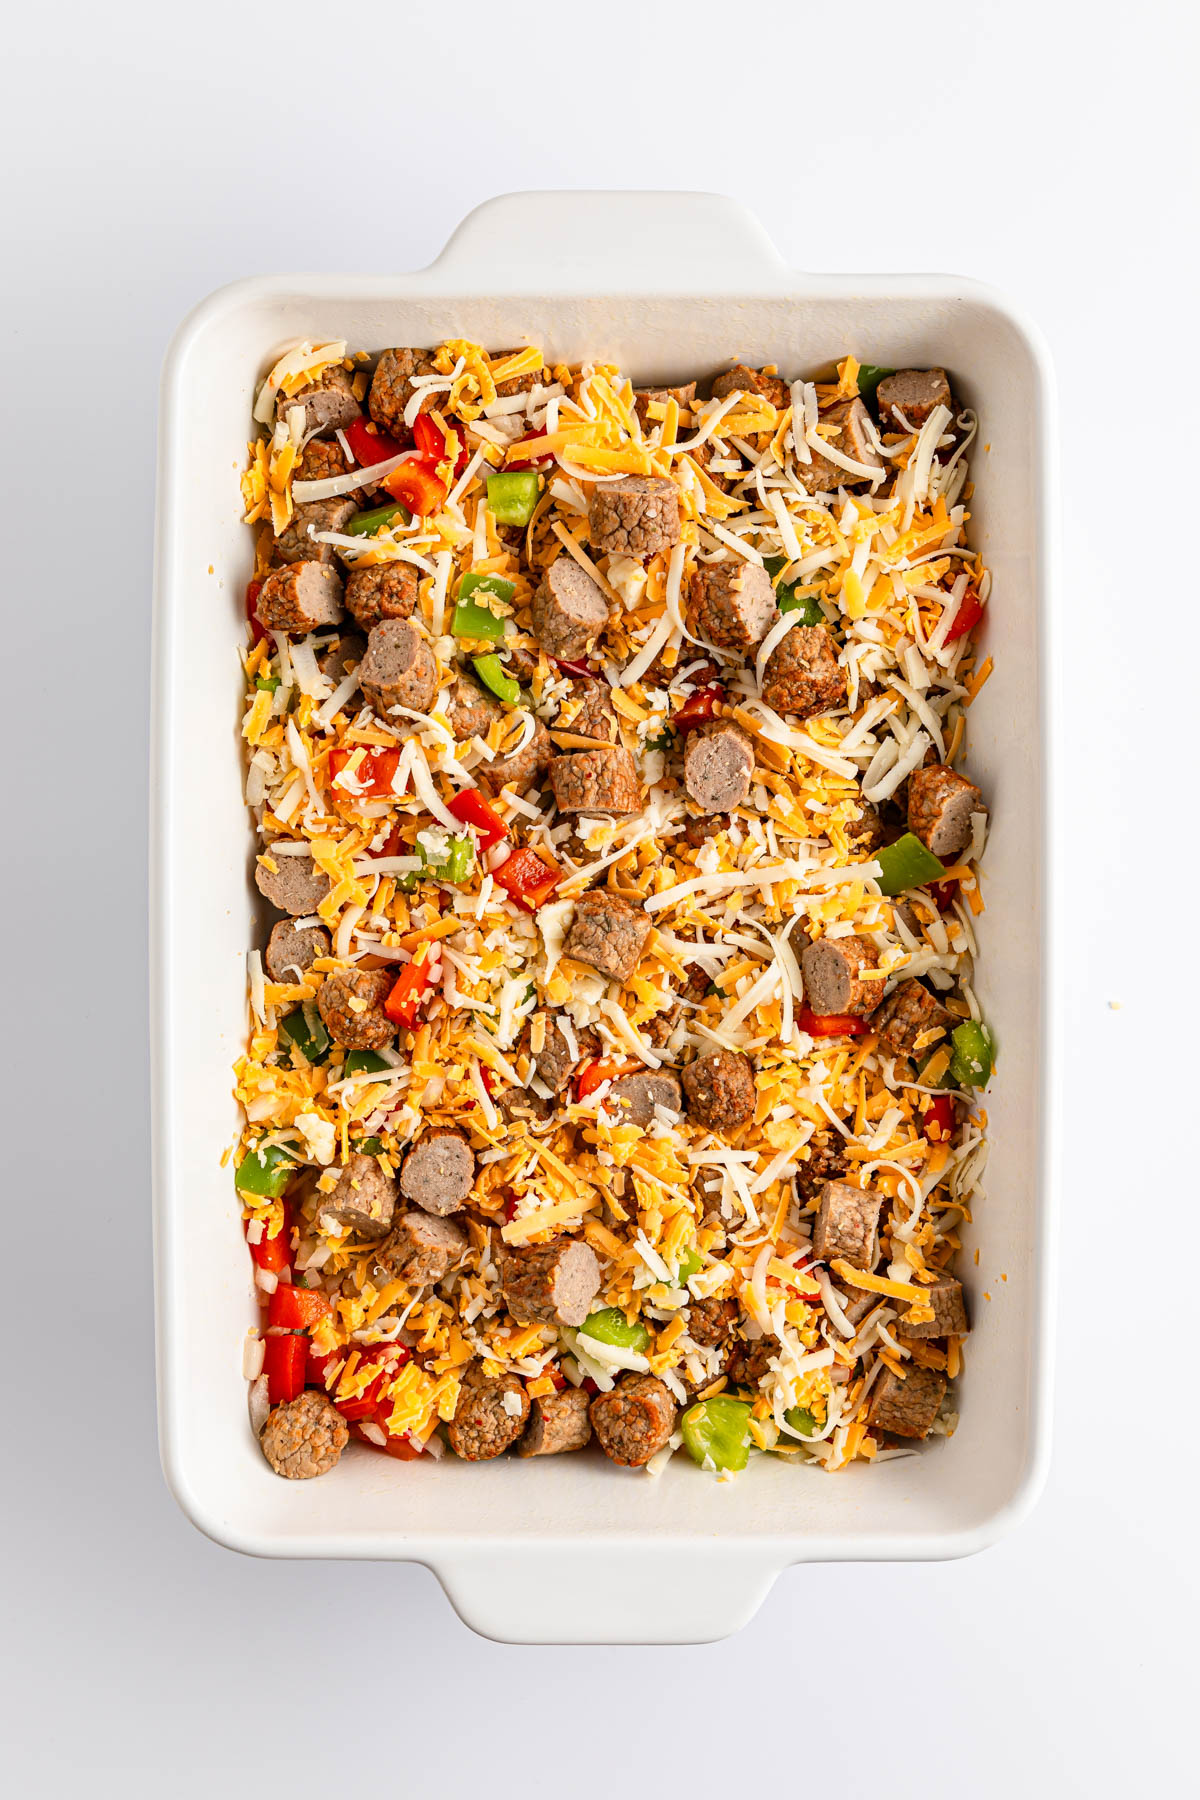 A baking dish filled with a colorful sausage and vegetable casserole topped with shredded cheese.